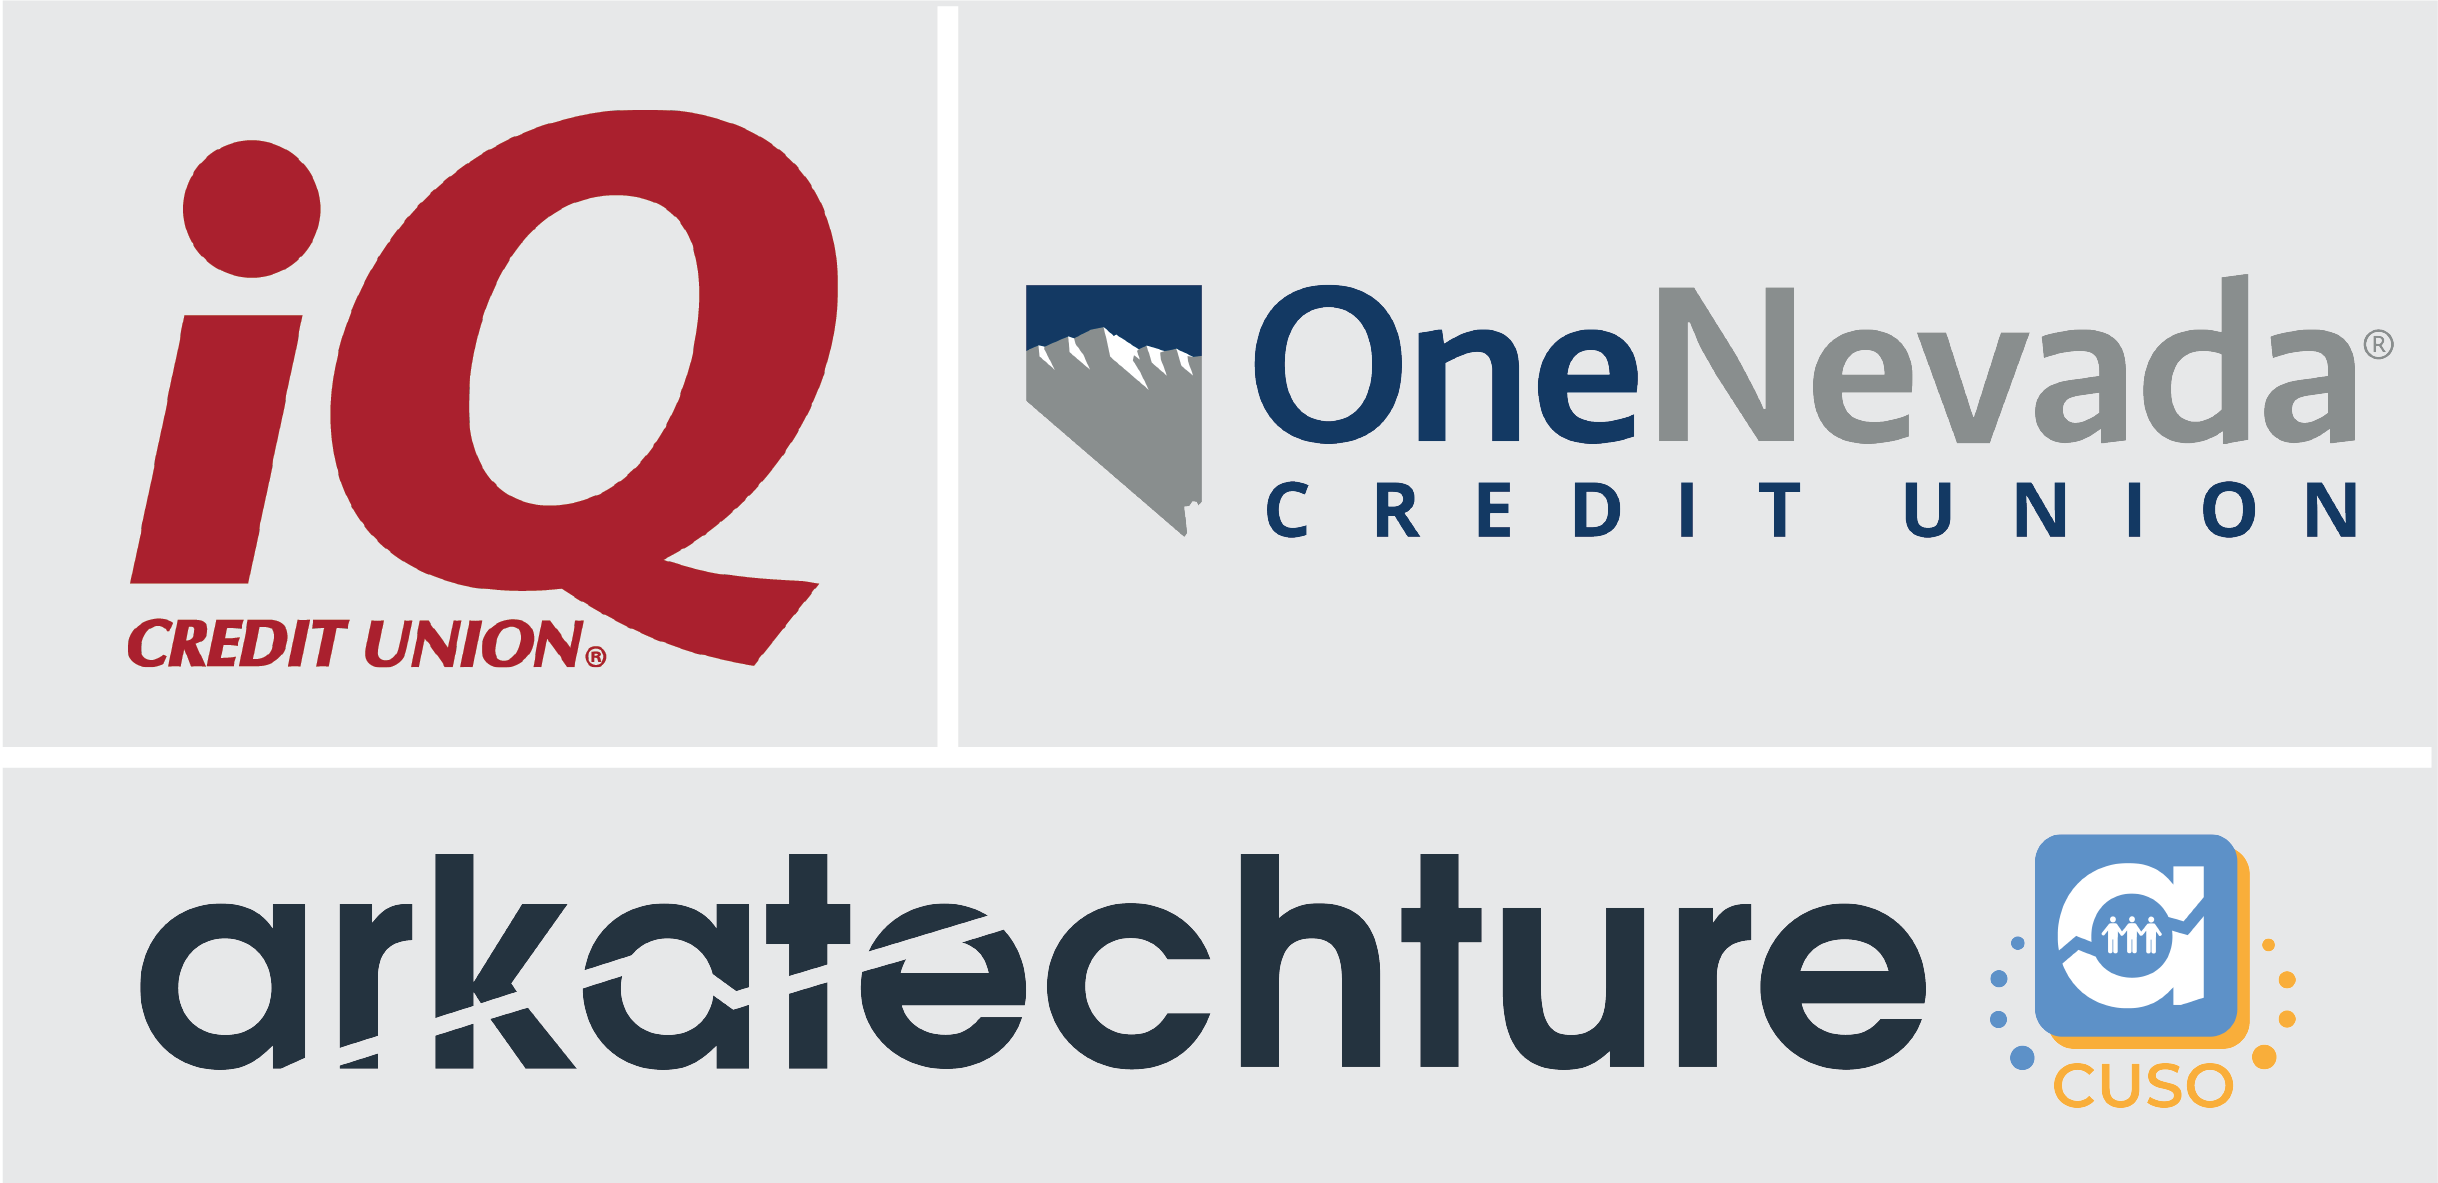 One Nevada Credit Union & iQ Credit Union Join Arkatechture CUSO Partnership